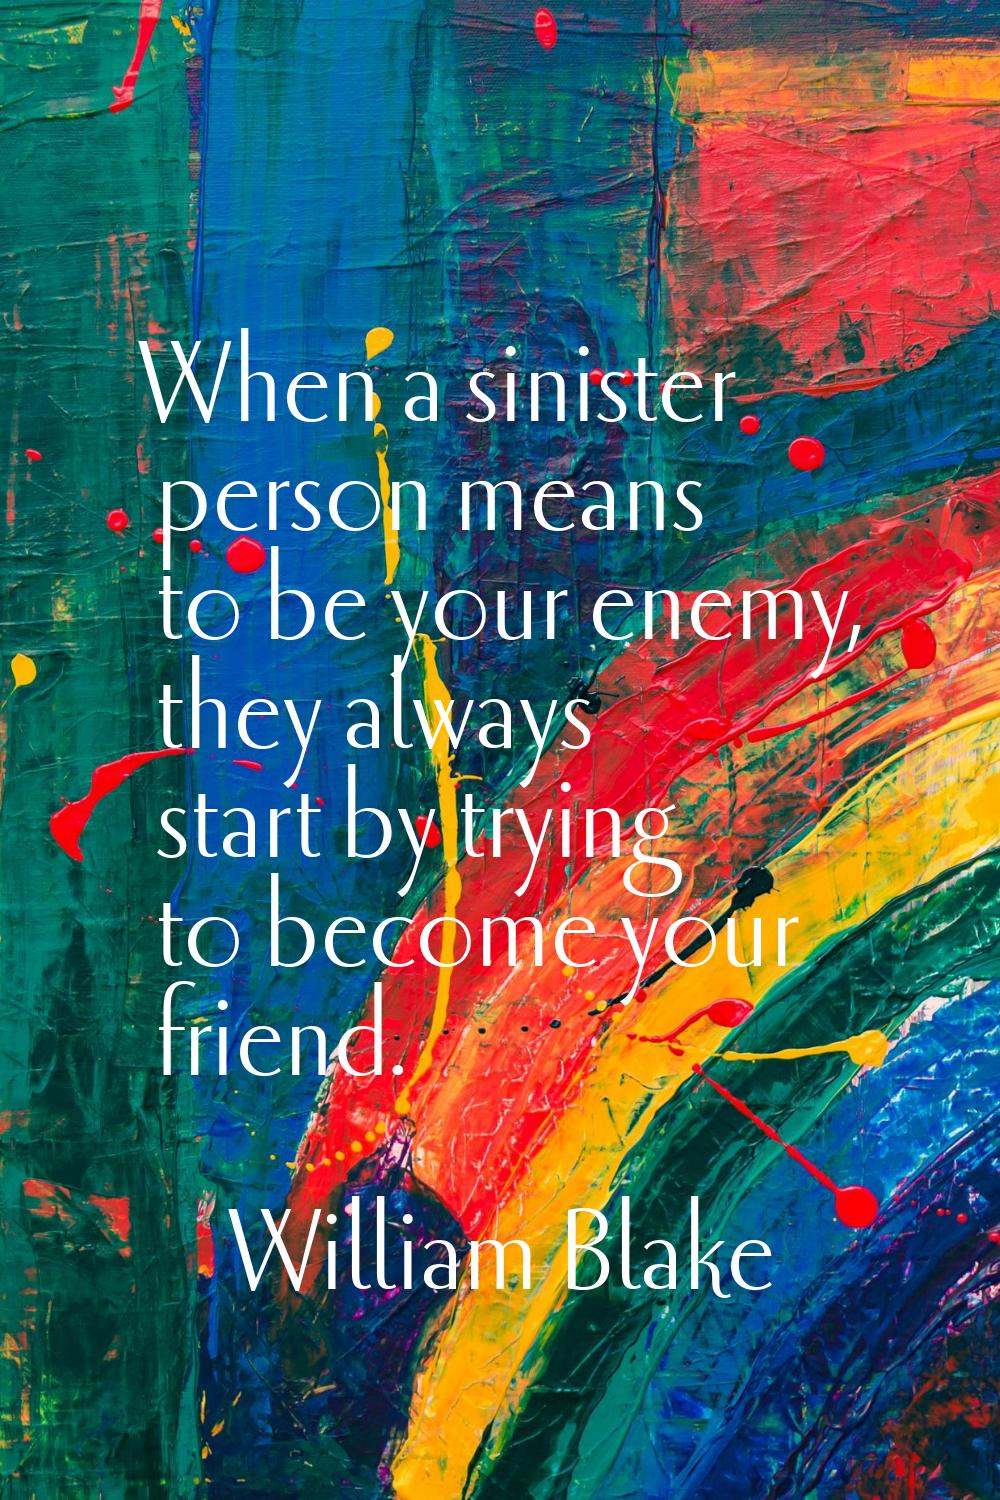 When a sinister person means to be your enemy, they always start by trying to become your friend.